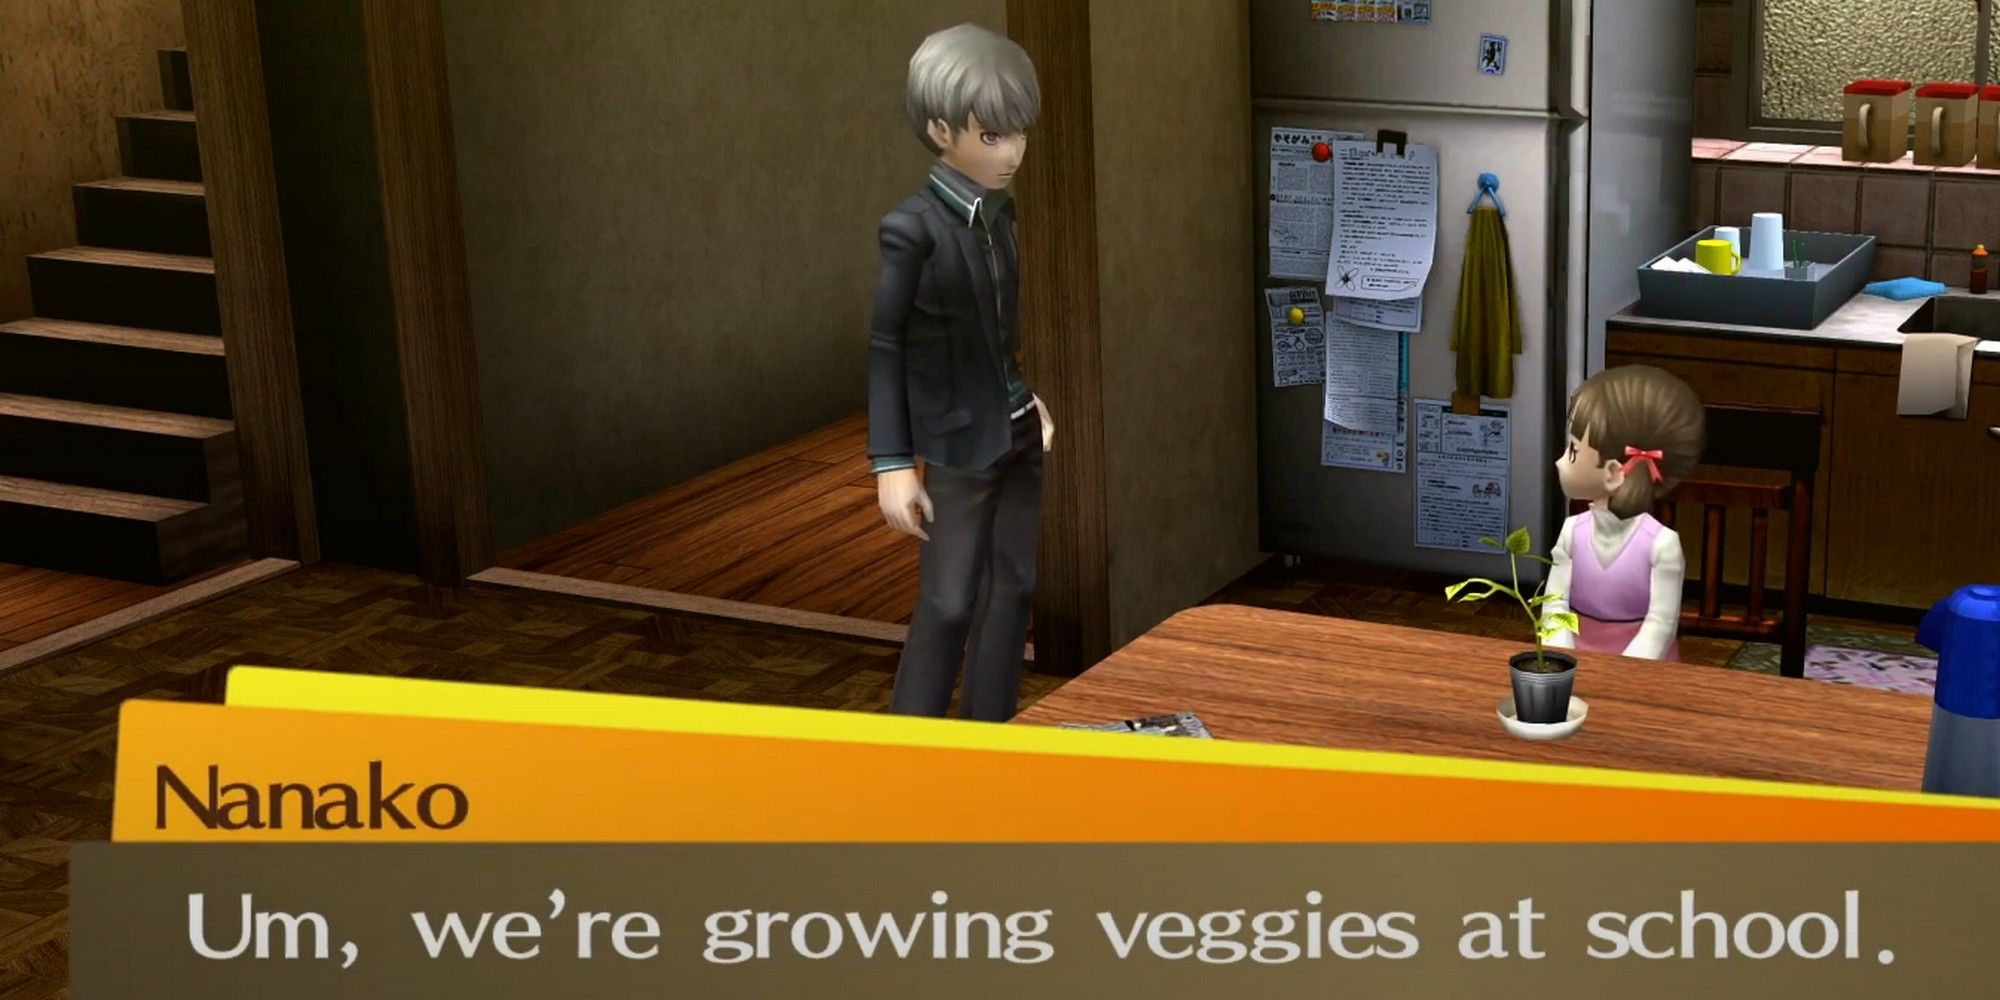 Nanako telling Yu about growing vegetables at school in Persona 4 Golden